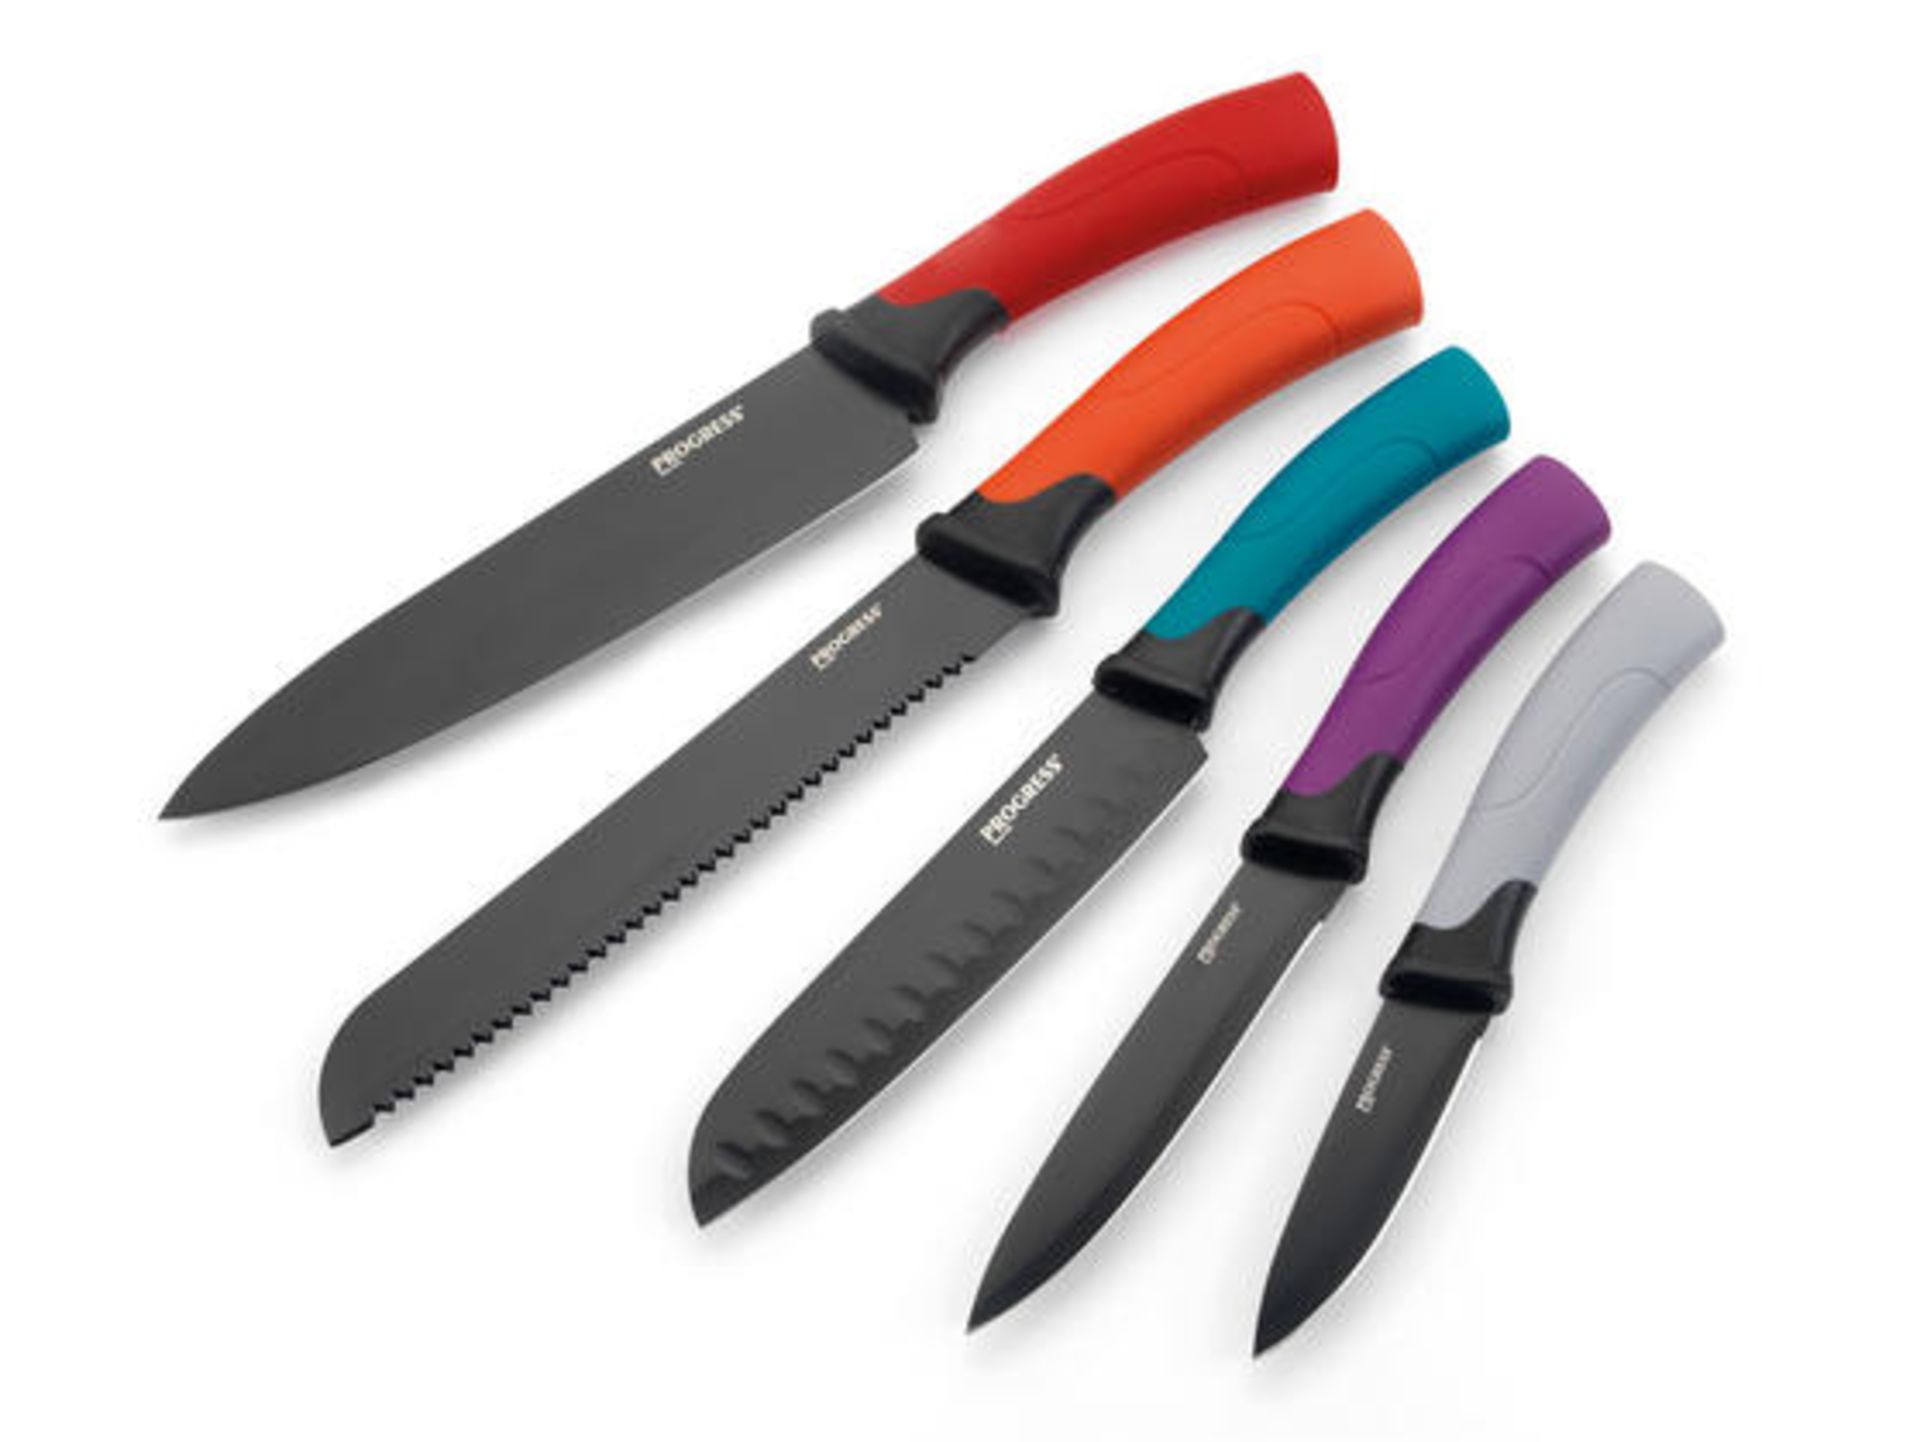 V Brand New Progress 5 Piece Smart Knife Block With Multi Coloured Handles - Secure Block locking - Image 4 of 4